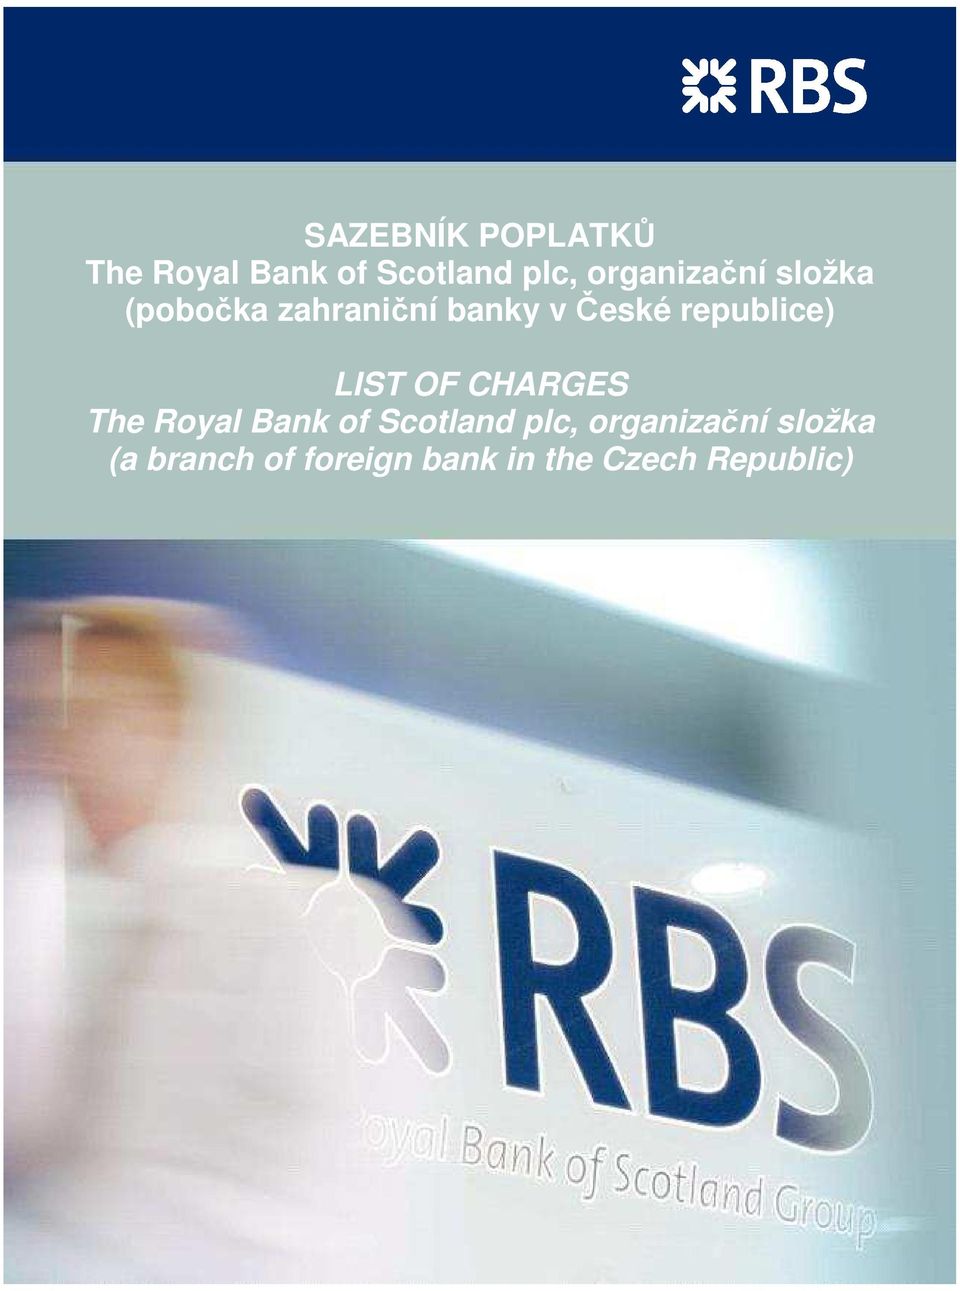 republice) LIST OF CHARGES The Royal Bank of Scotland